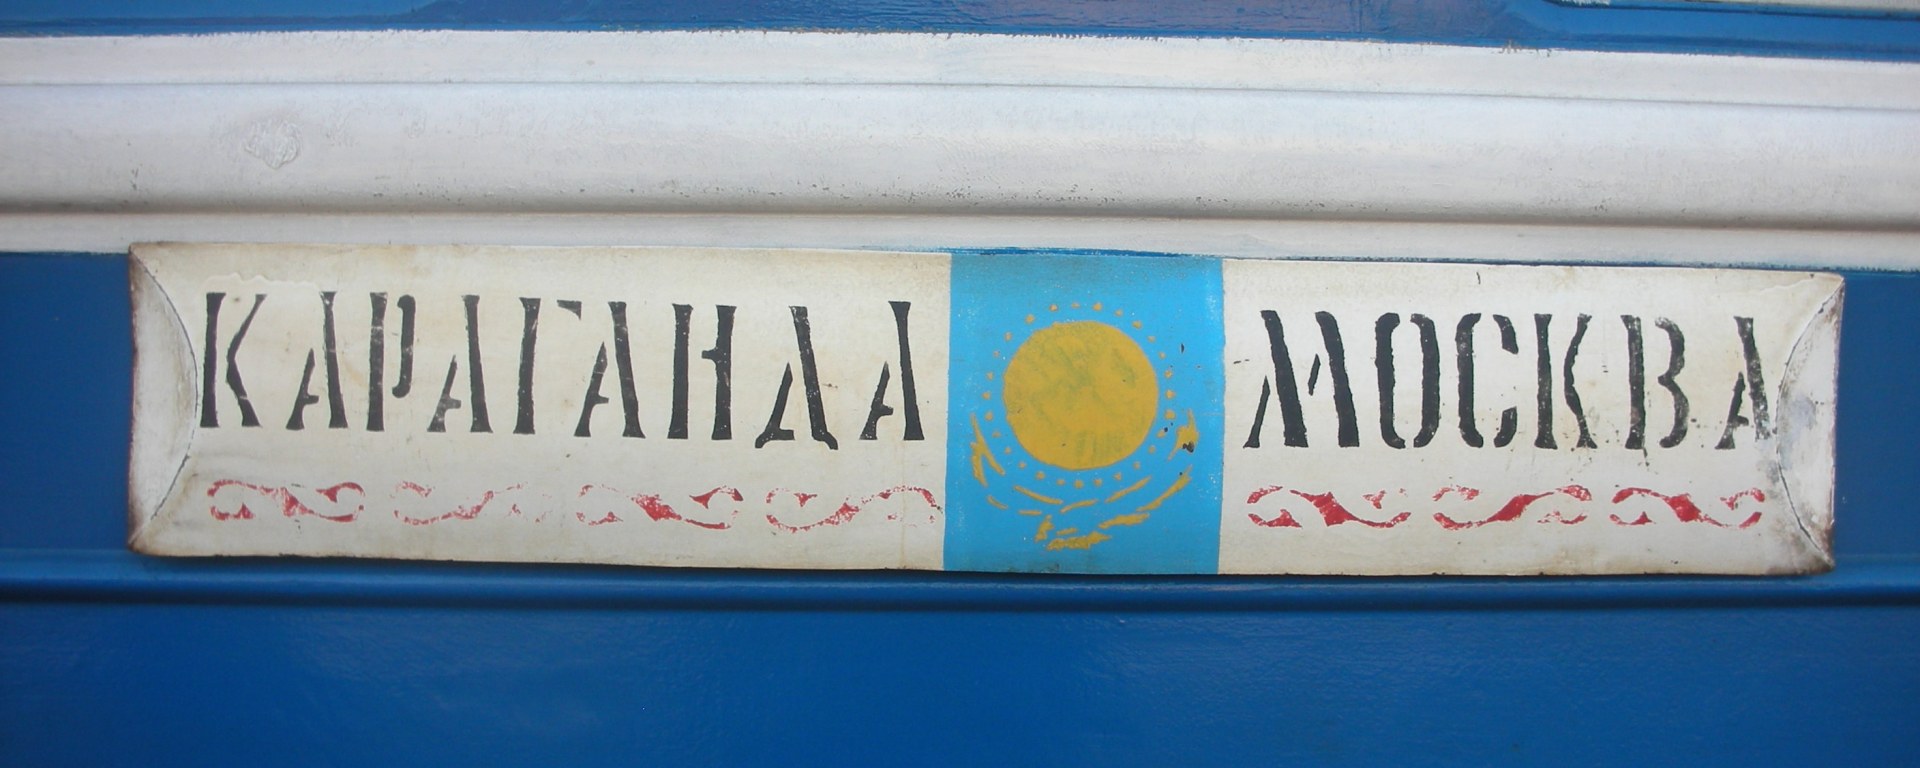 Train sign in Cyrillic letters on side of blue passenger car